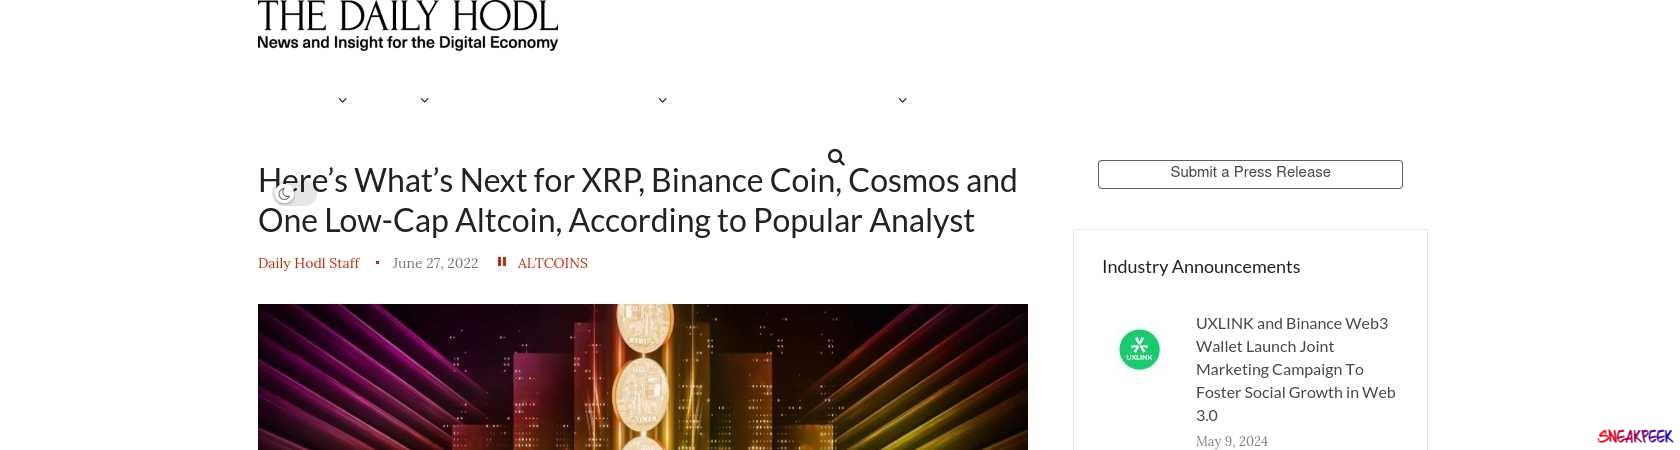 Read the full Article:  ⭲ Here’s What’s Next for XRP, Binance Coin, Cosmos and One Low-Cap Altcoin, According to Popular Analyst